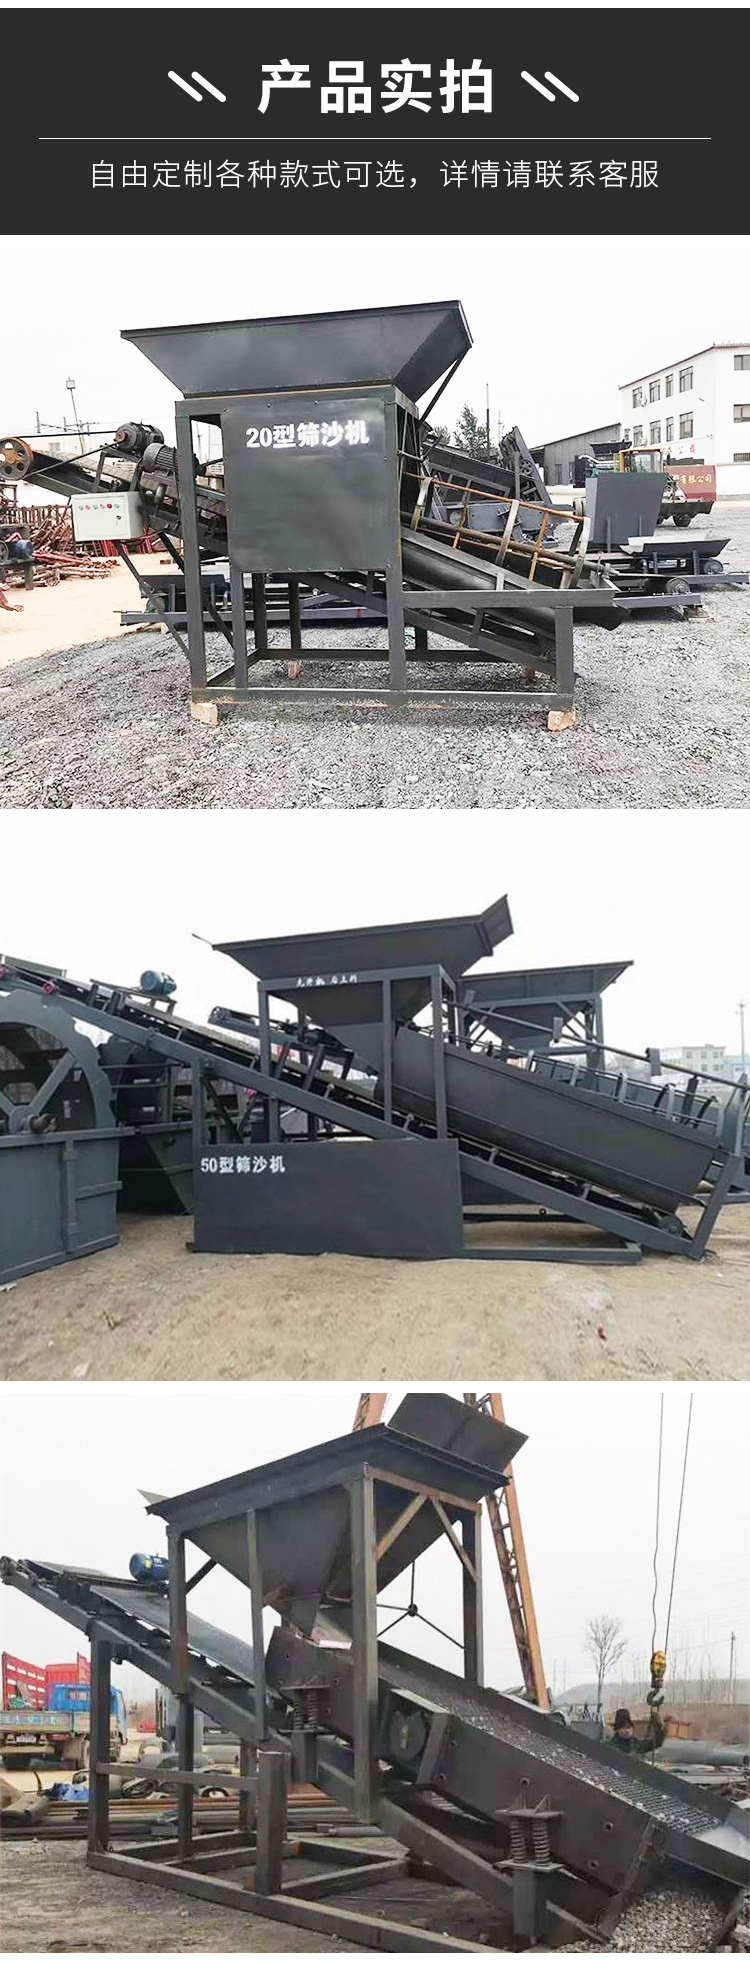 Longheng mobile drum screen produces 200 tons of vibrating screen with high sand separation rate, low energy consumption, and large output